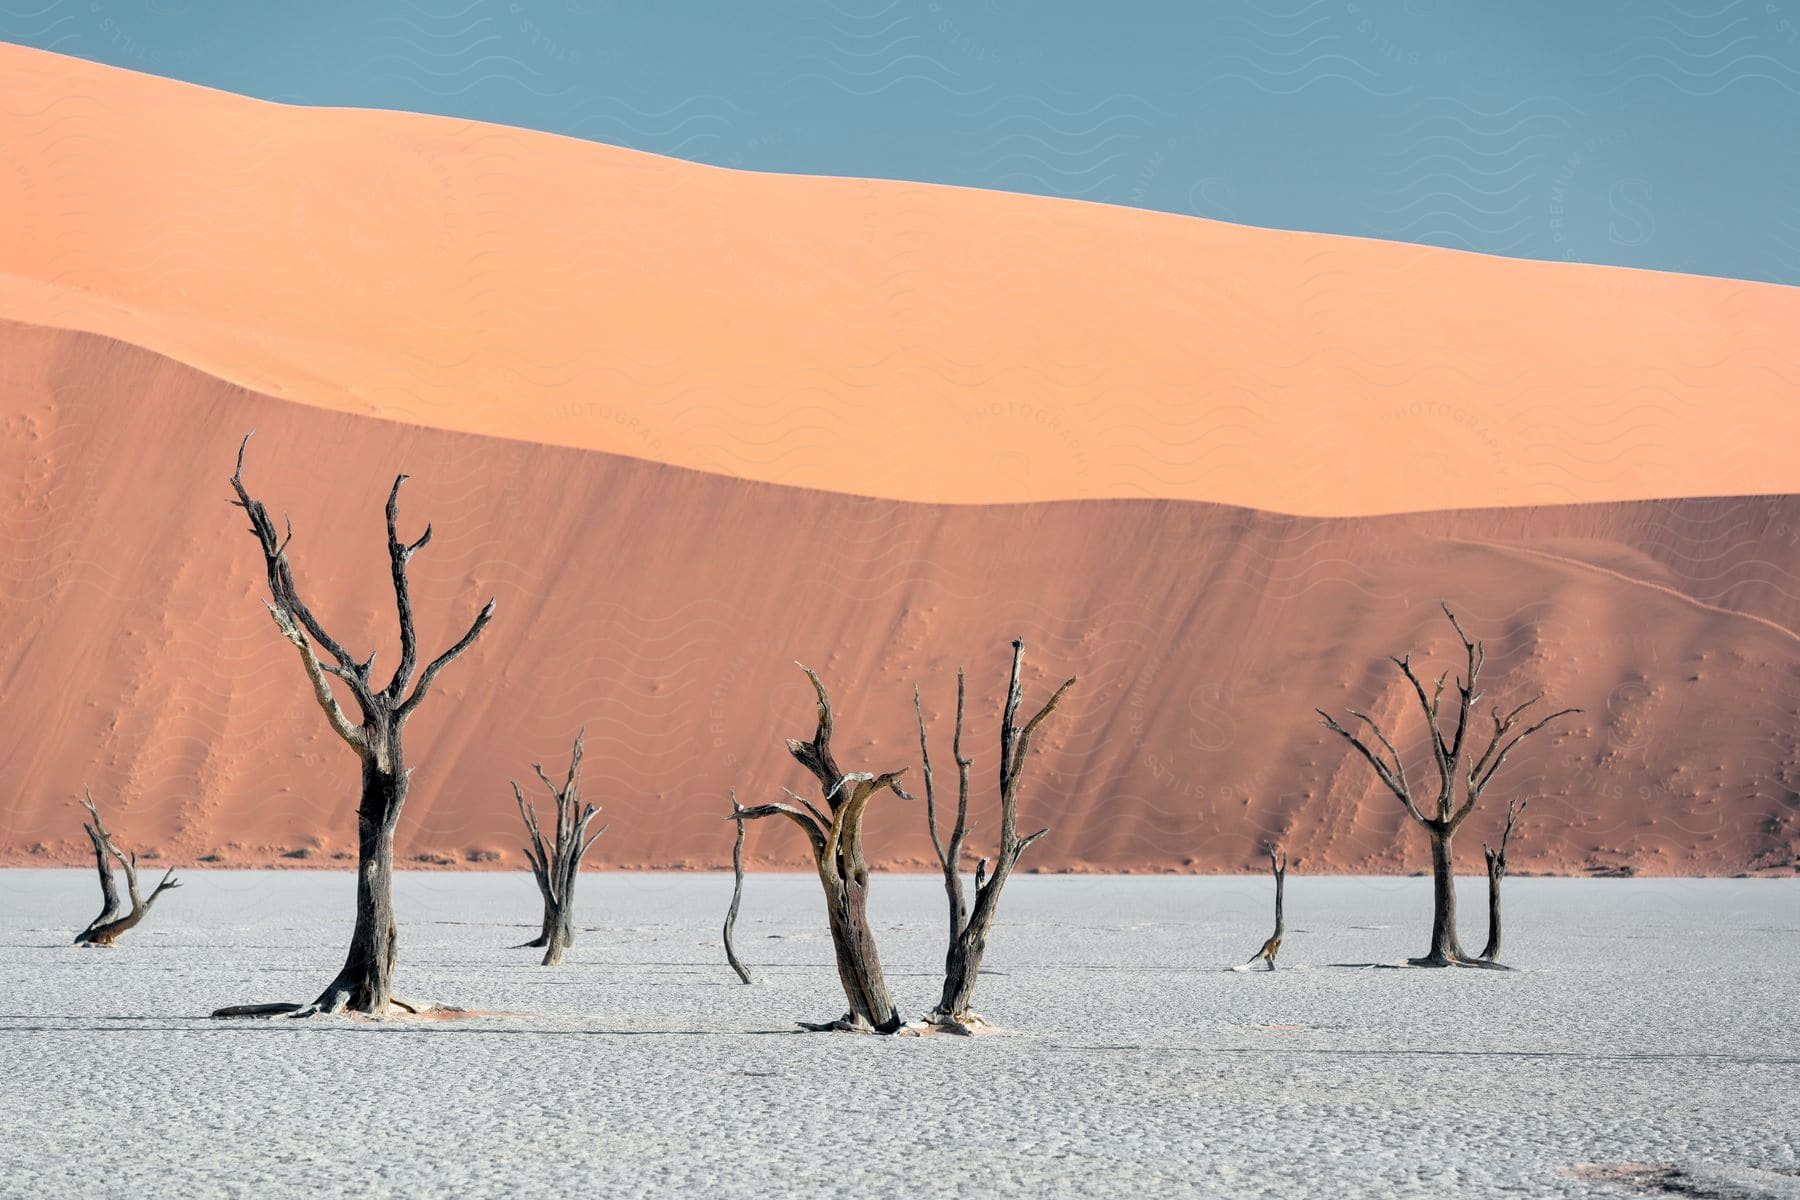 Dry trees in a flat desert with dunes in the background